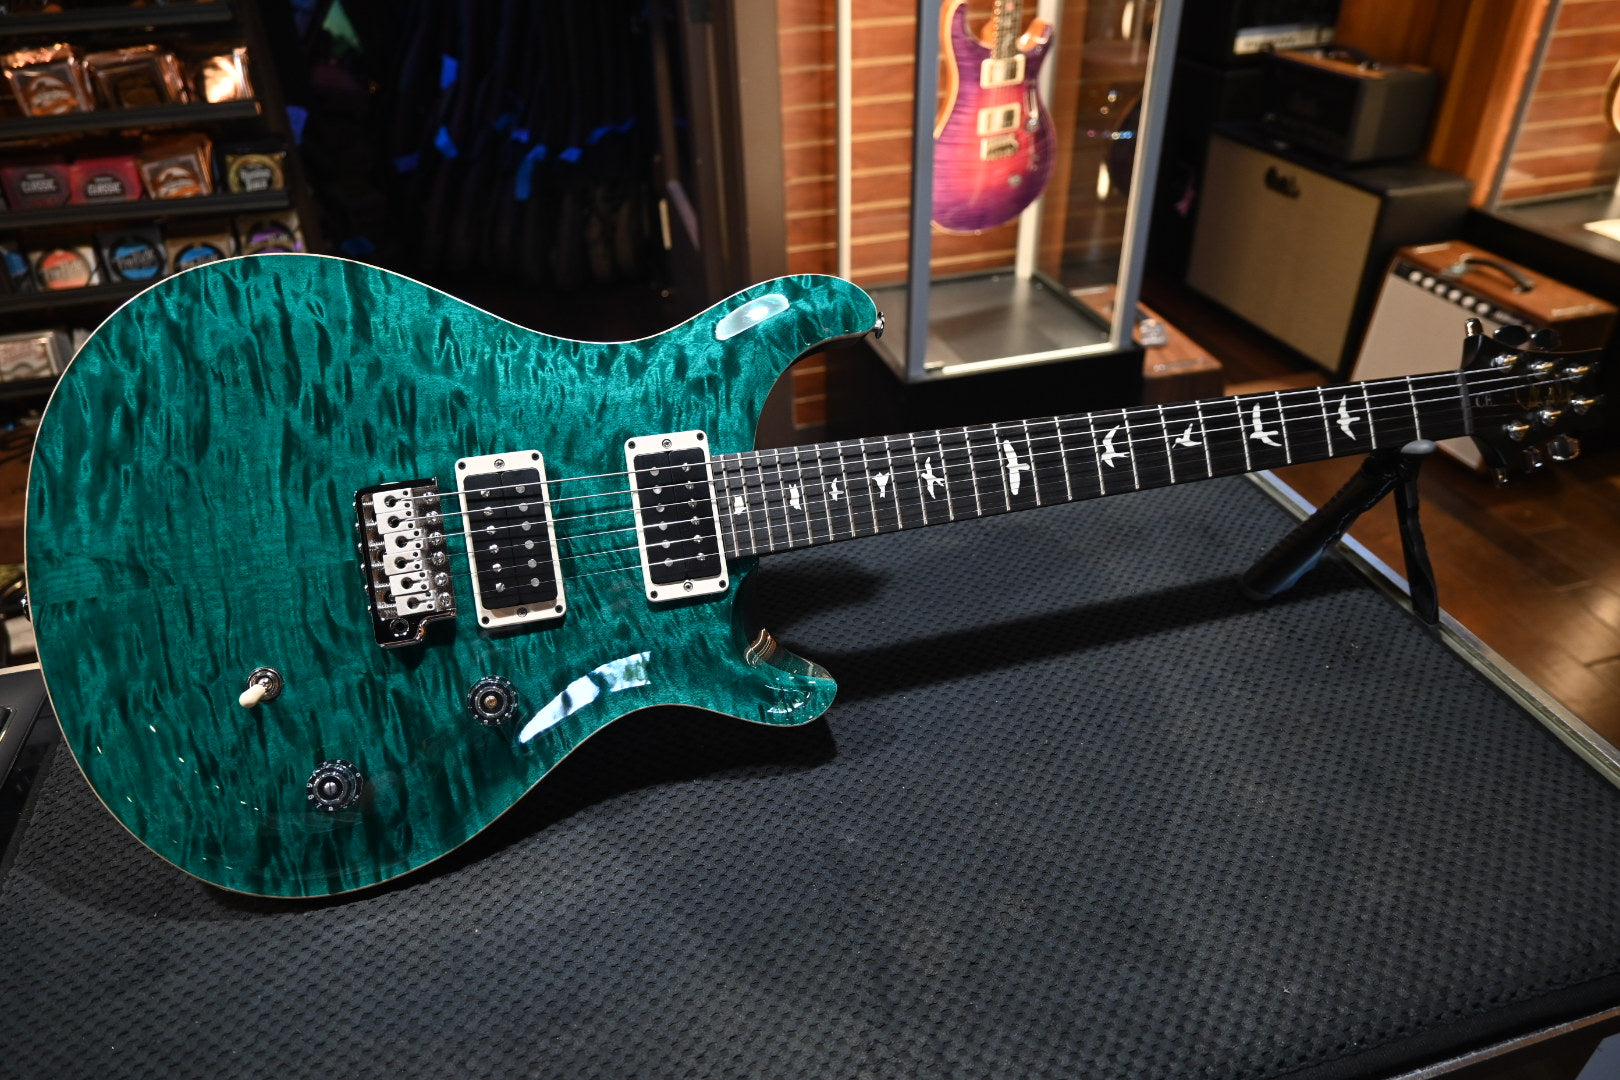 PRS Wood Library CE 24 Quilt - Turquoise Guitar #3693 - Danville Music